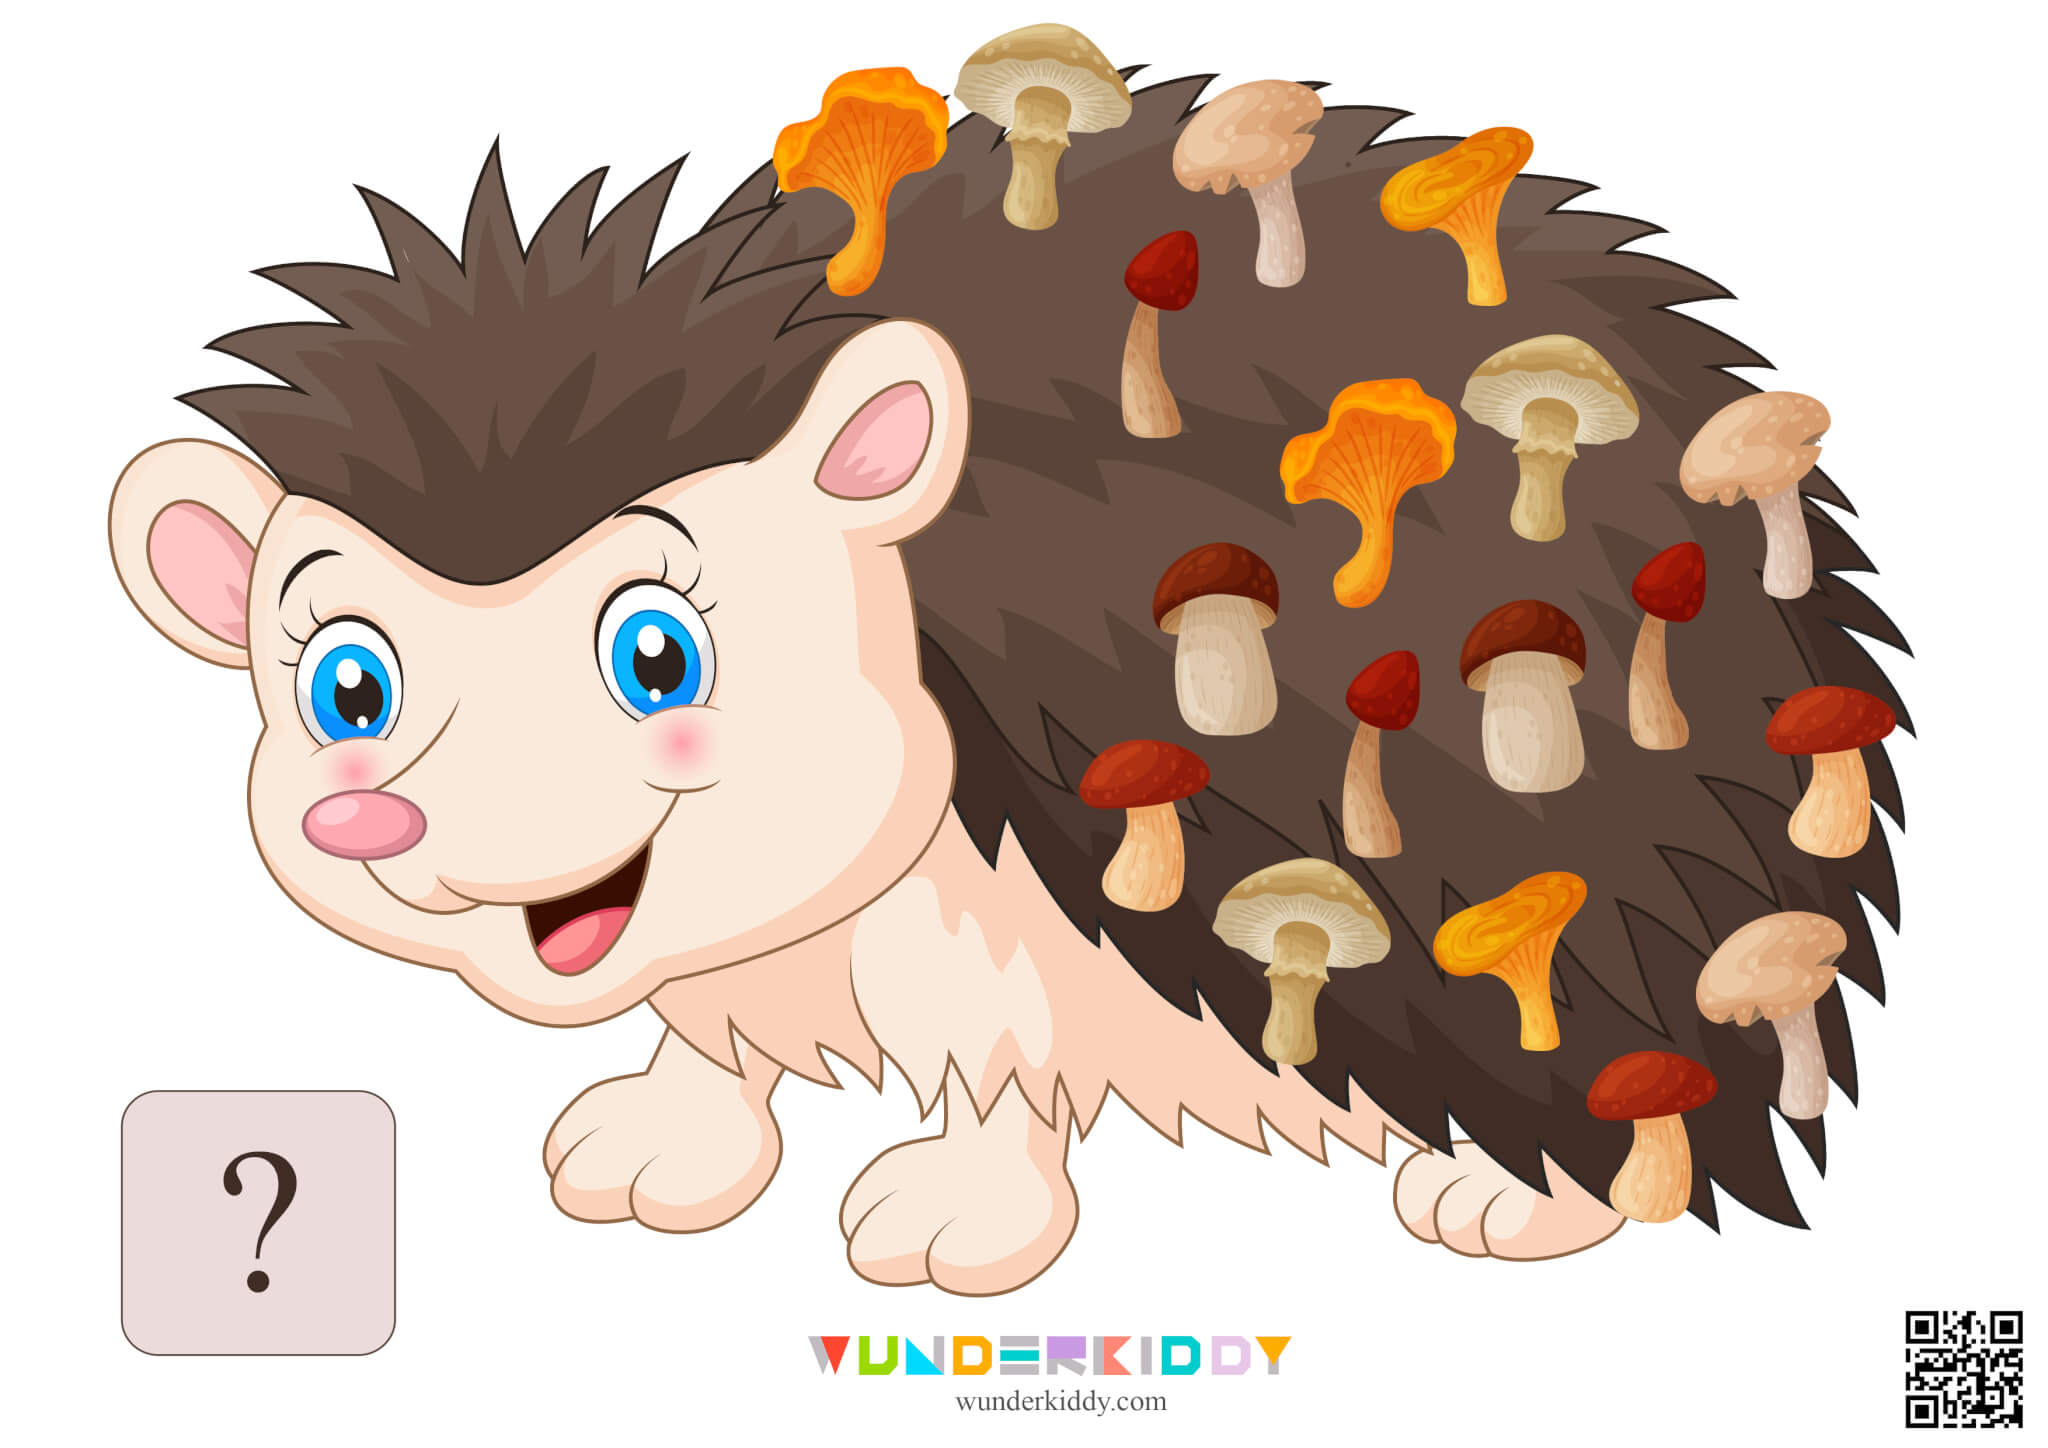 Worksheet Count to 20 with Hedgehog and Mushrooms - Image 22